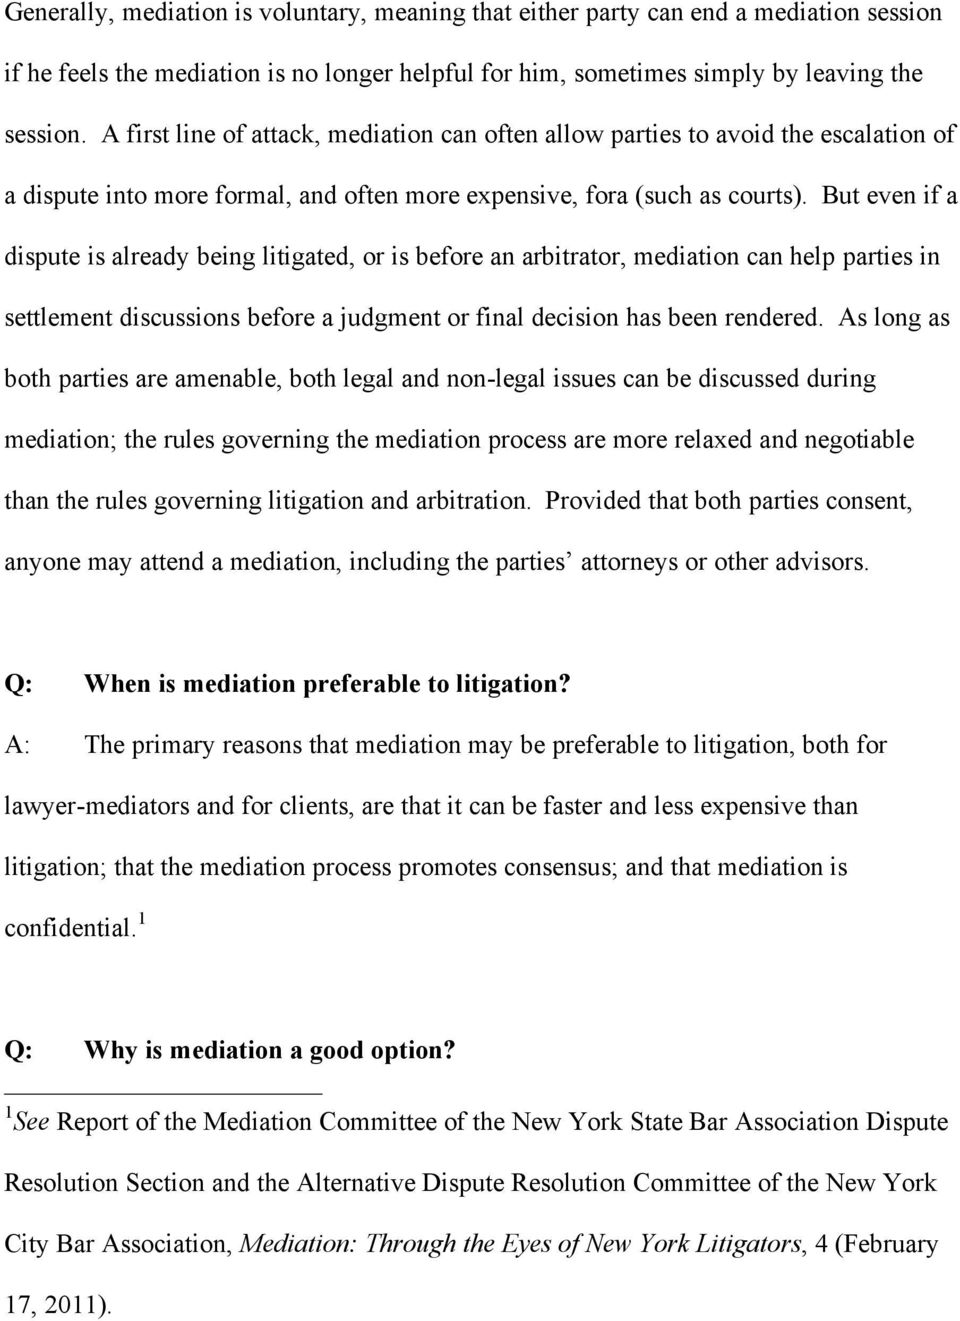 But even if a dispute is already being litigated, or is before an arbitrator, mediation can help parties in settlement discussions before a judgment or final decision has been rendered.